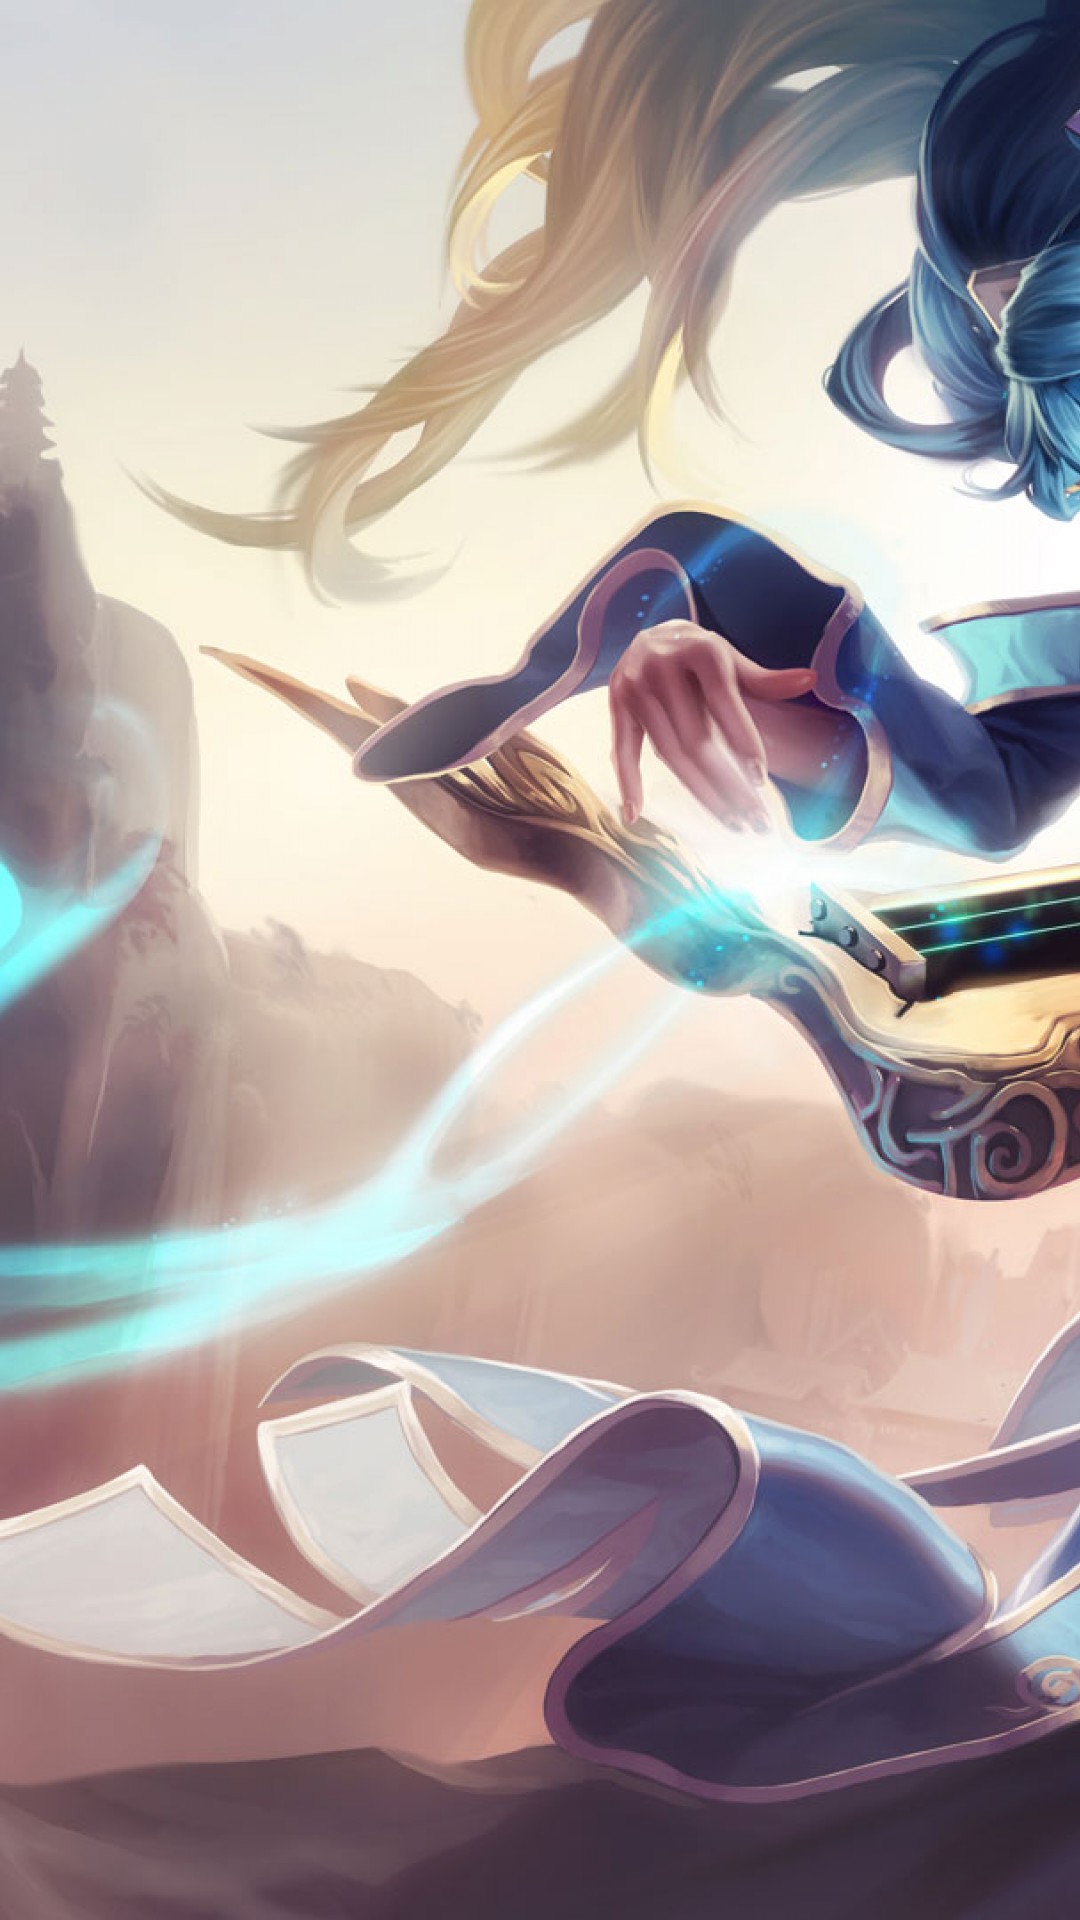 League Of Legends Sona Hd Wallpaper for Desktop and Mobiles iPhone 6 / 6S  Plus - HD Wallpaper 